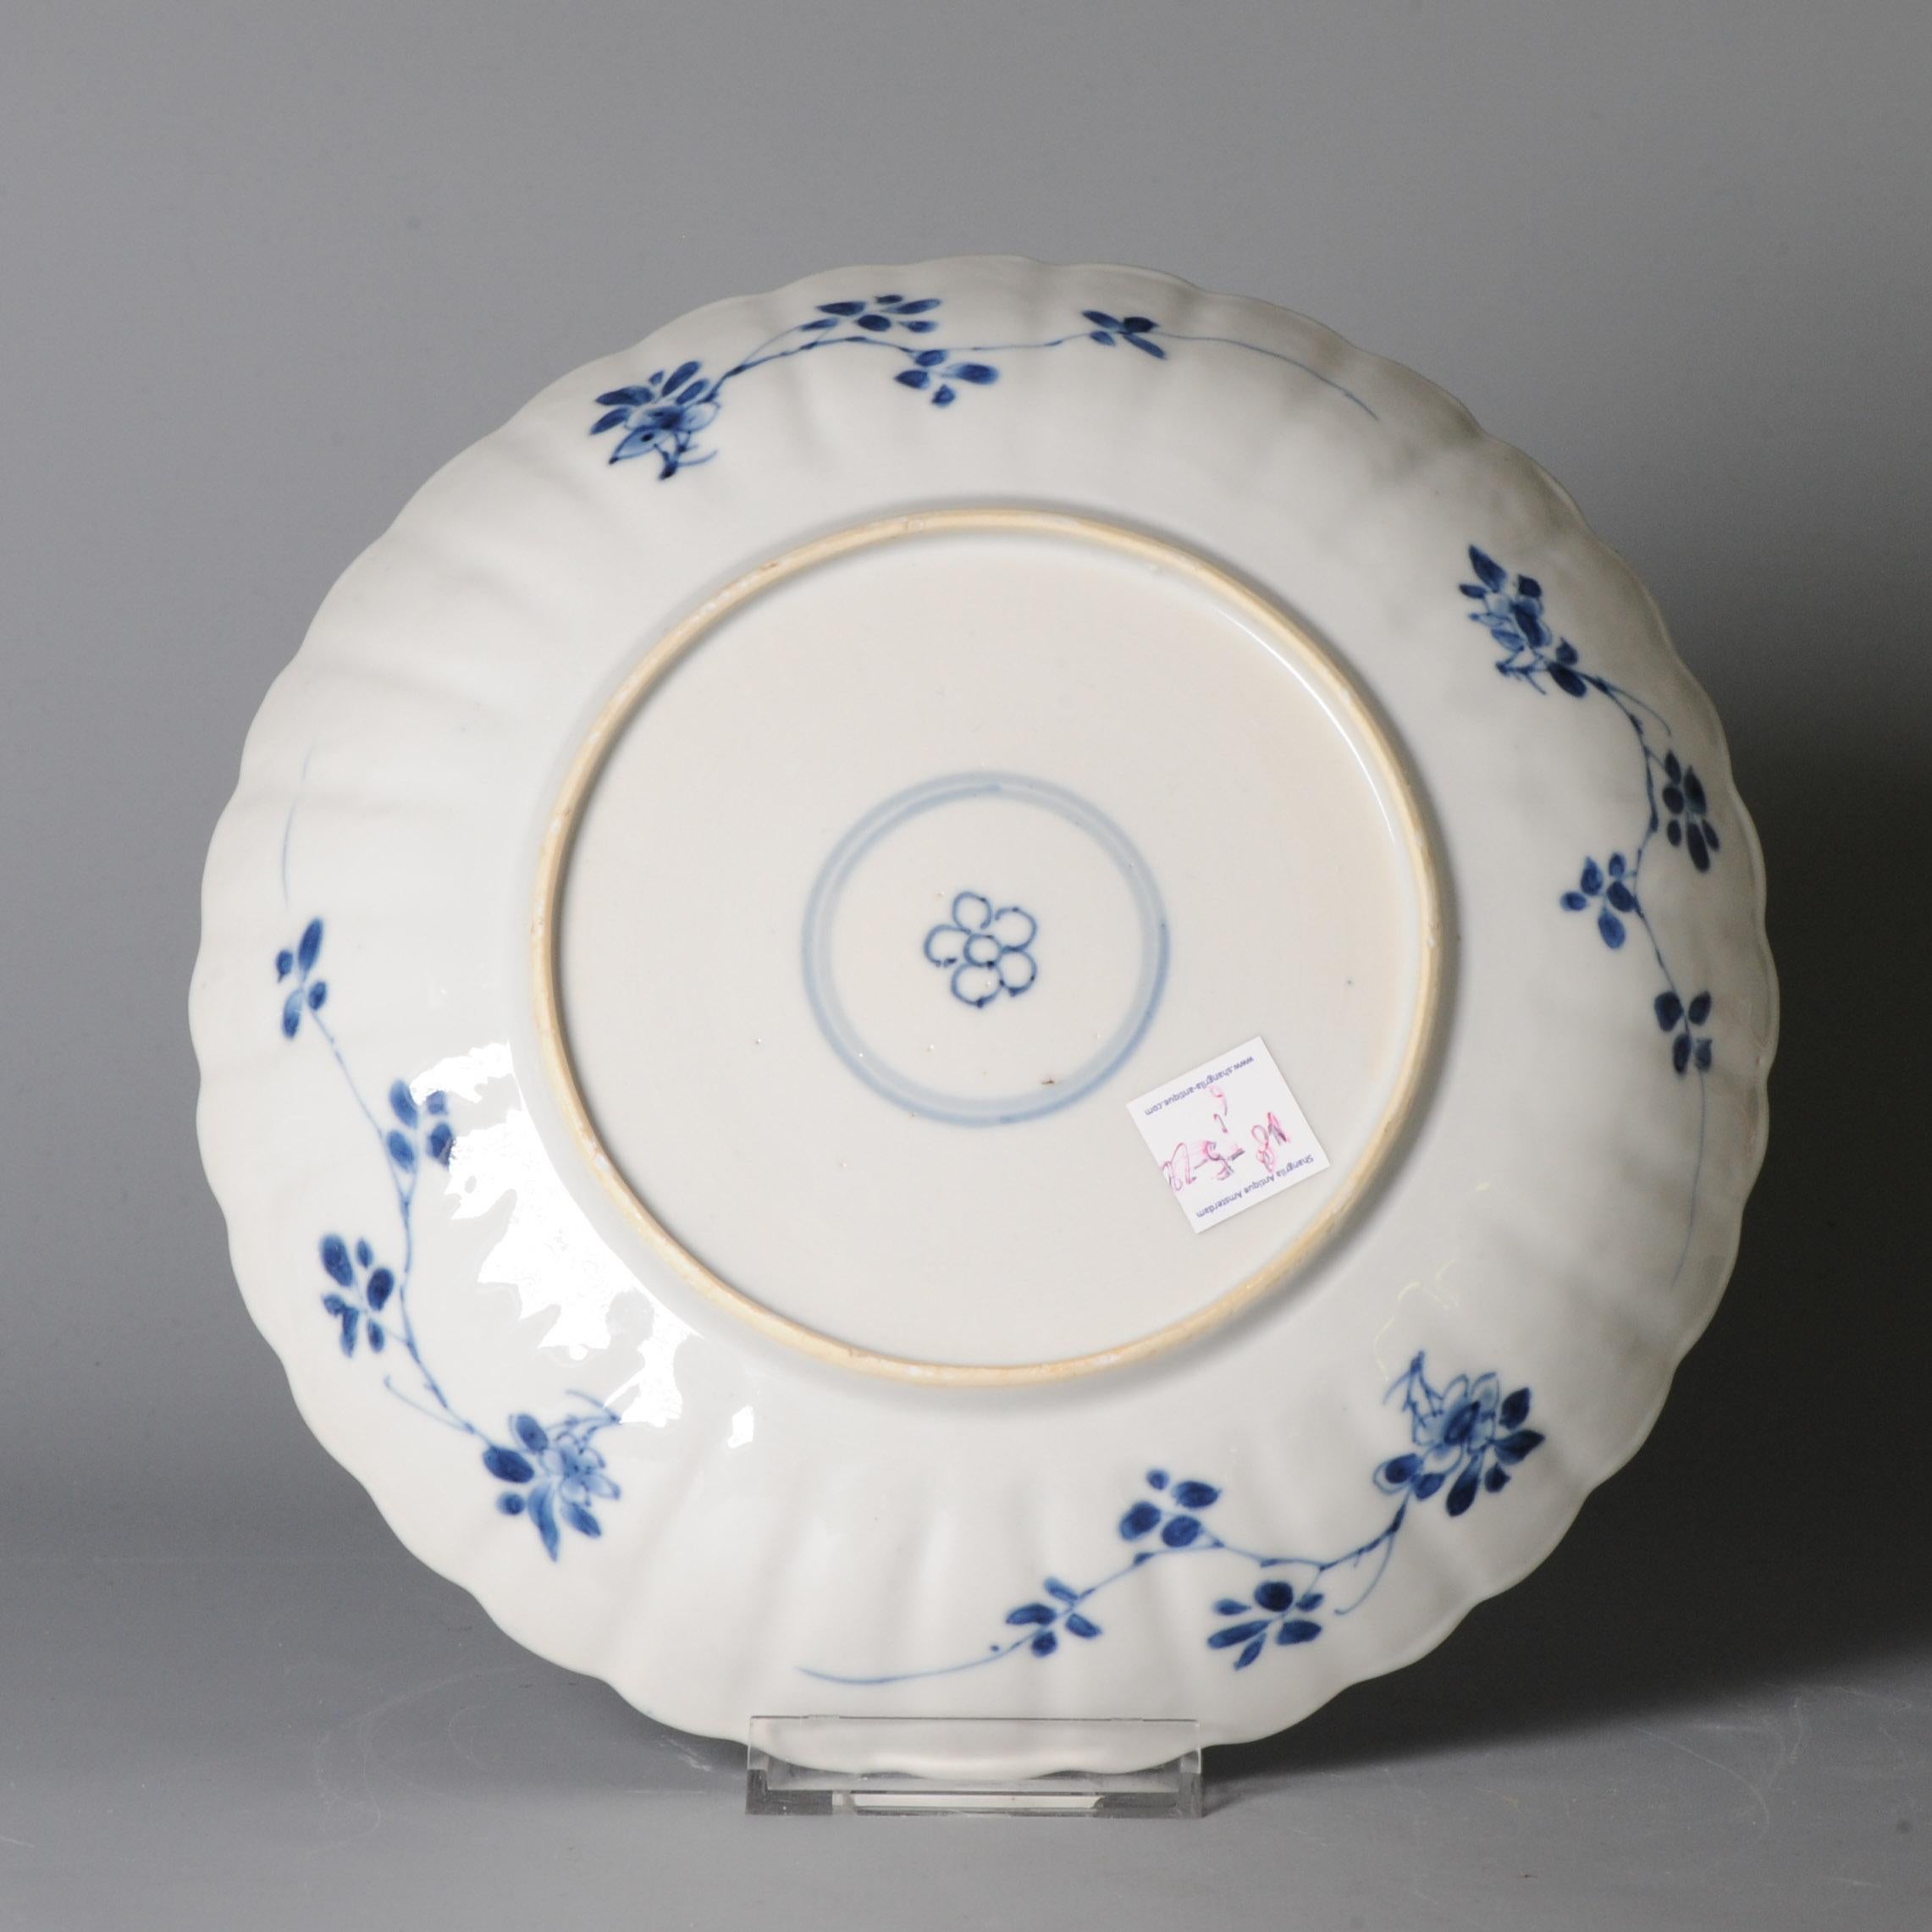 A Rare Kangxi porcelain Blue and White Plates with Bird and floral decoration 1